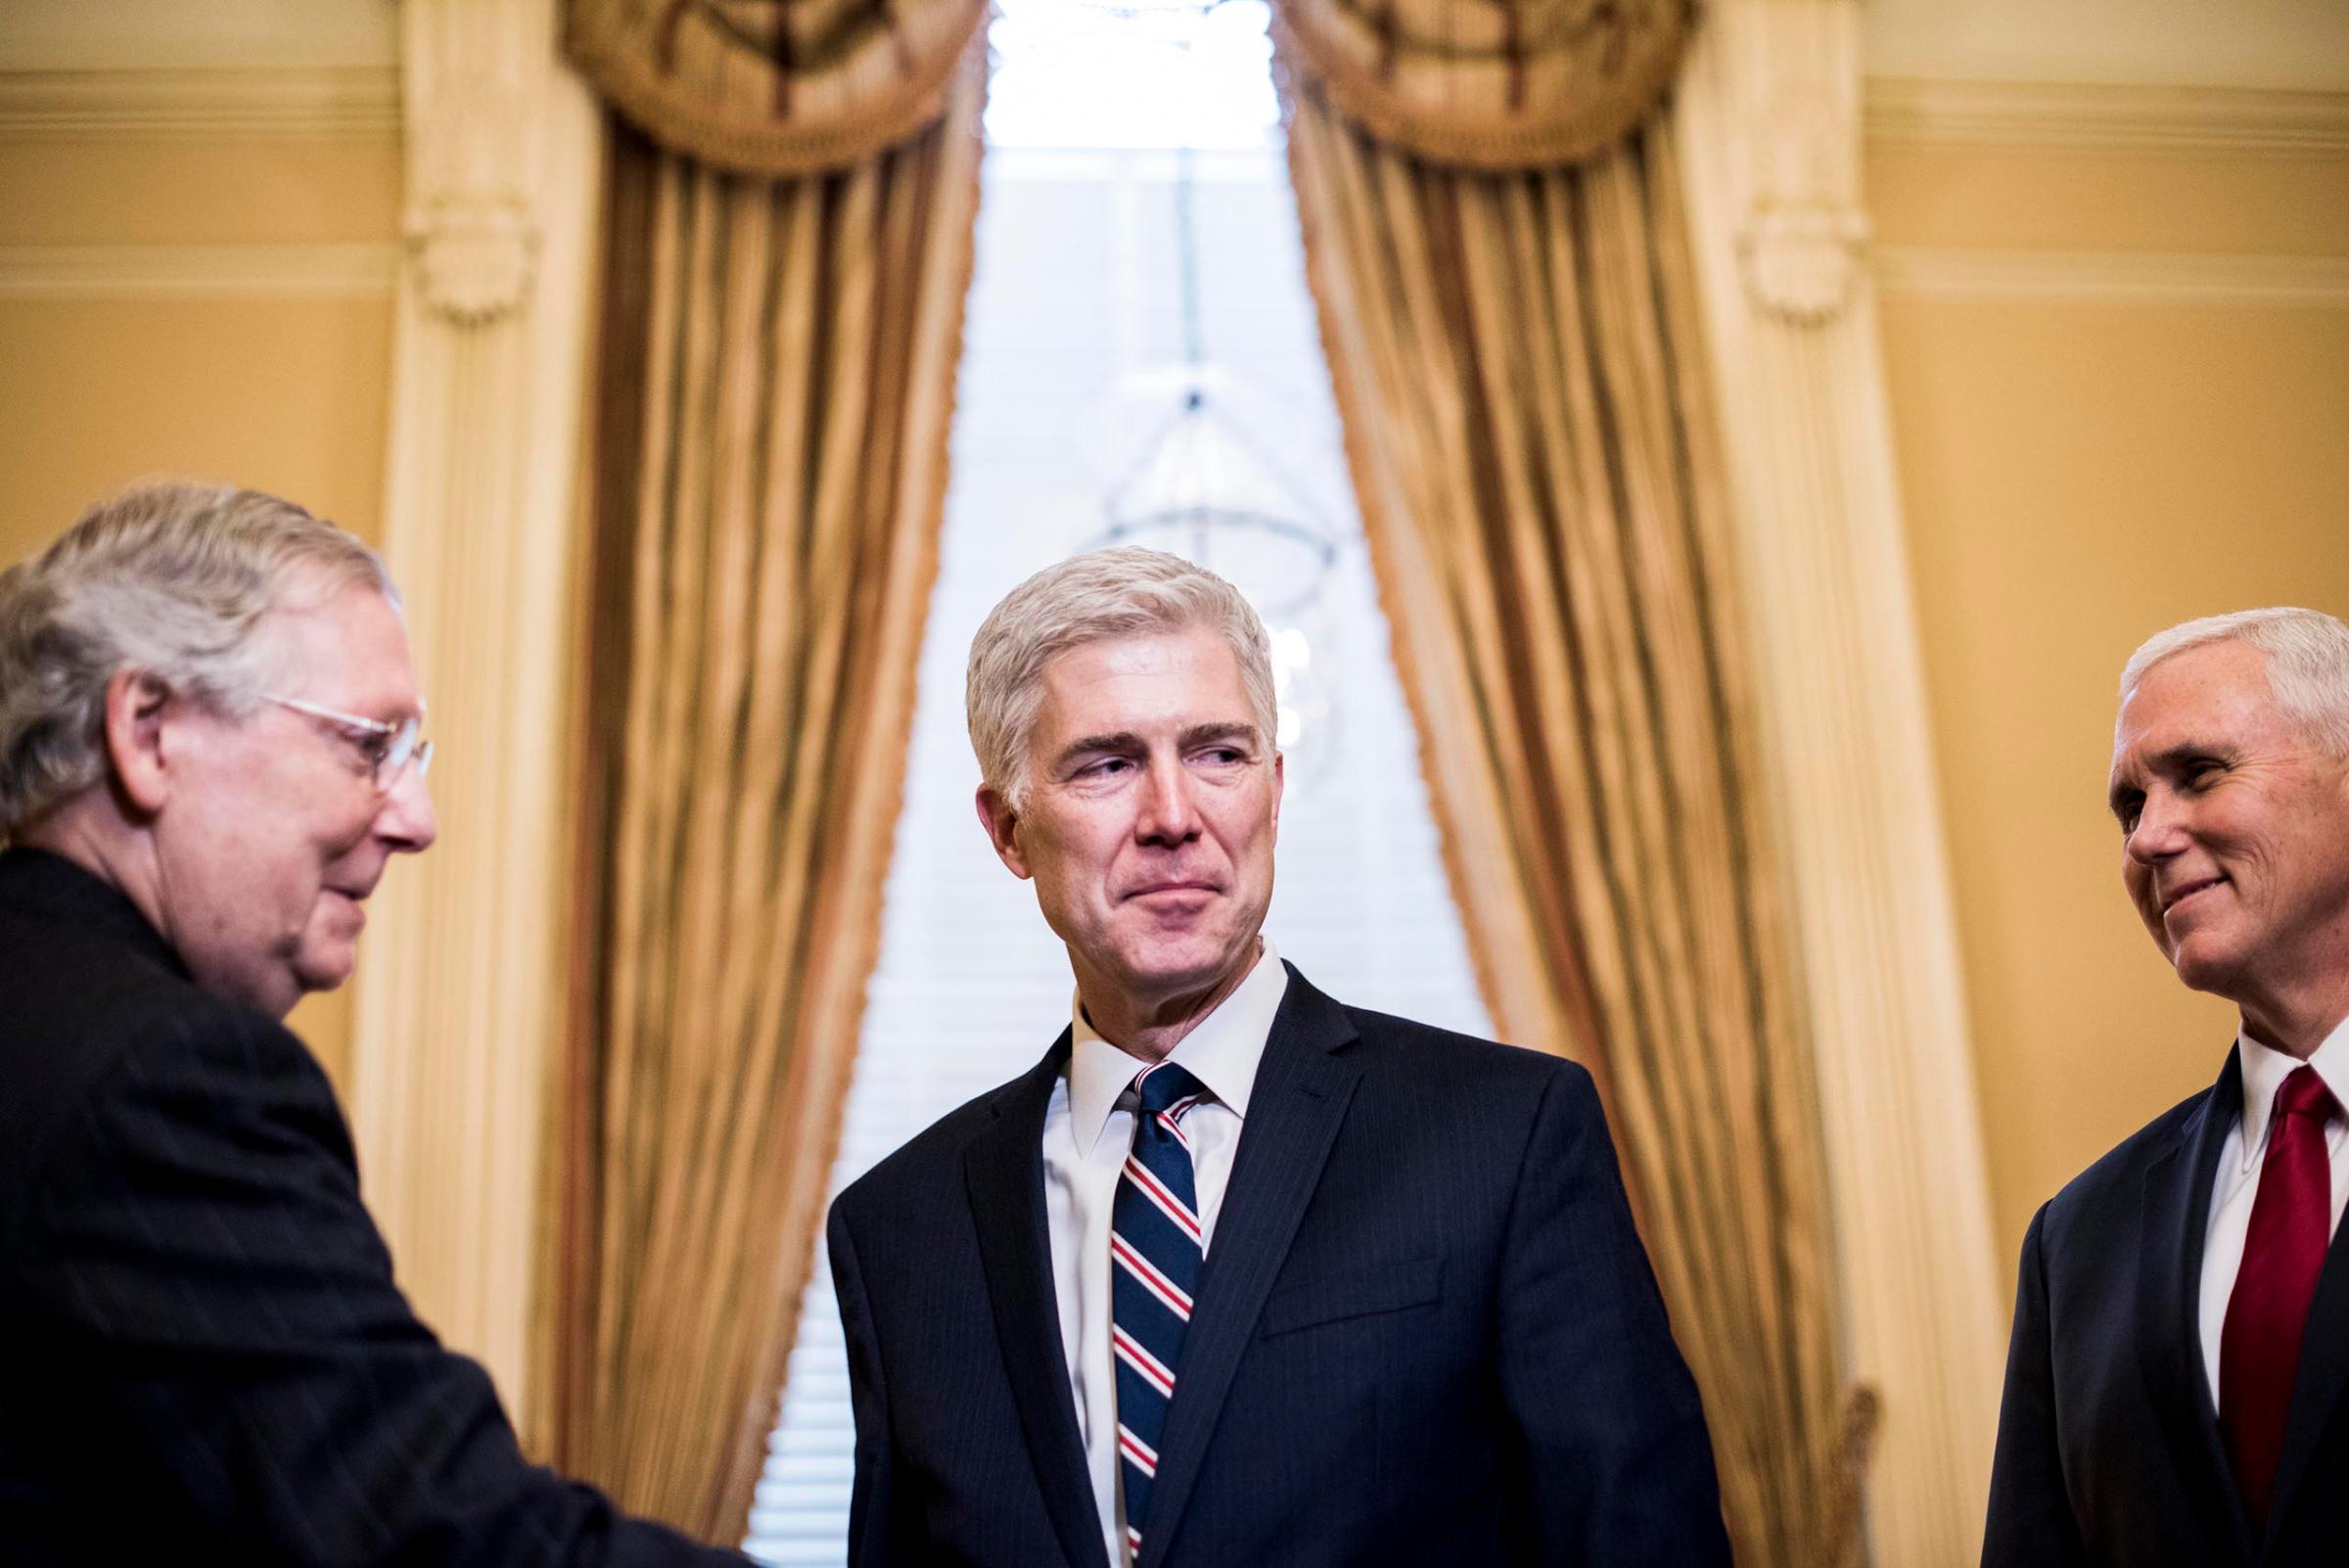 Gorsuch with Senate Majority Leader Mitch McConnell (R-TN) and Vice President Mike Pence,on Capitol Hill in Washington, D.C., Feb. 1, 2017.